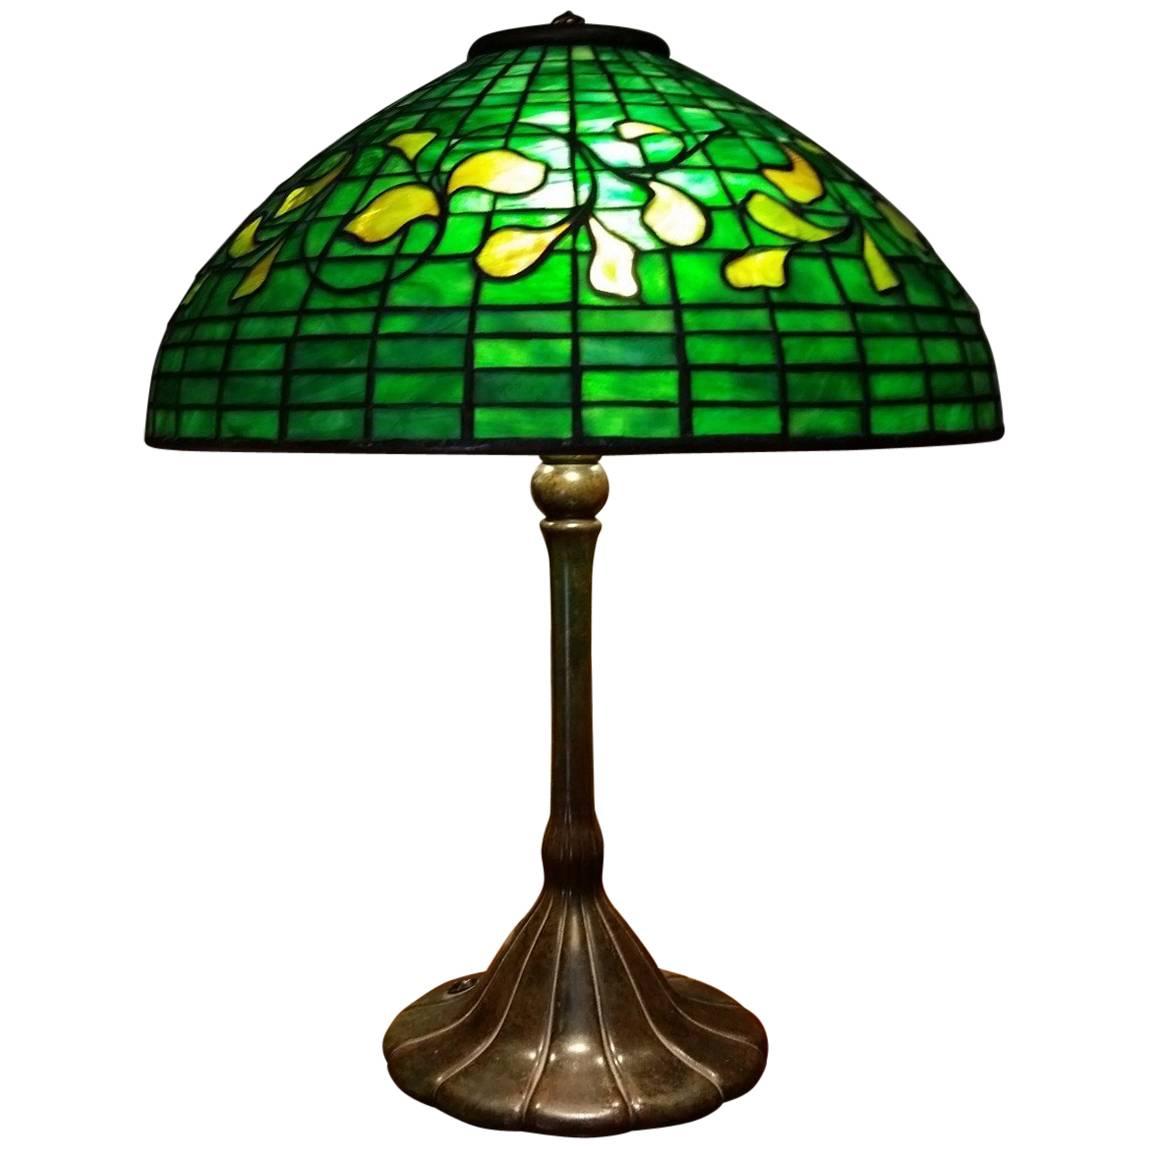 Rare Tiffany Table Lamp in Swirling Leaf Pattern